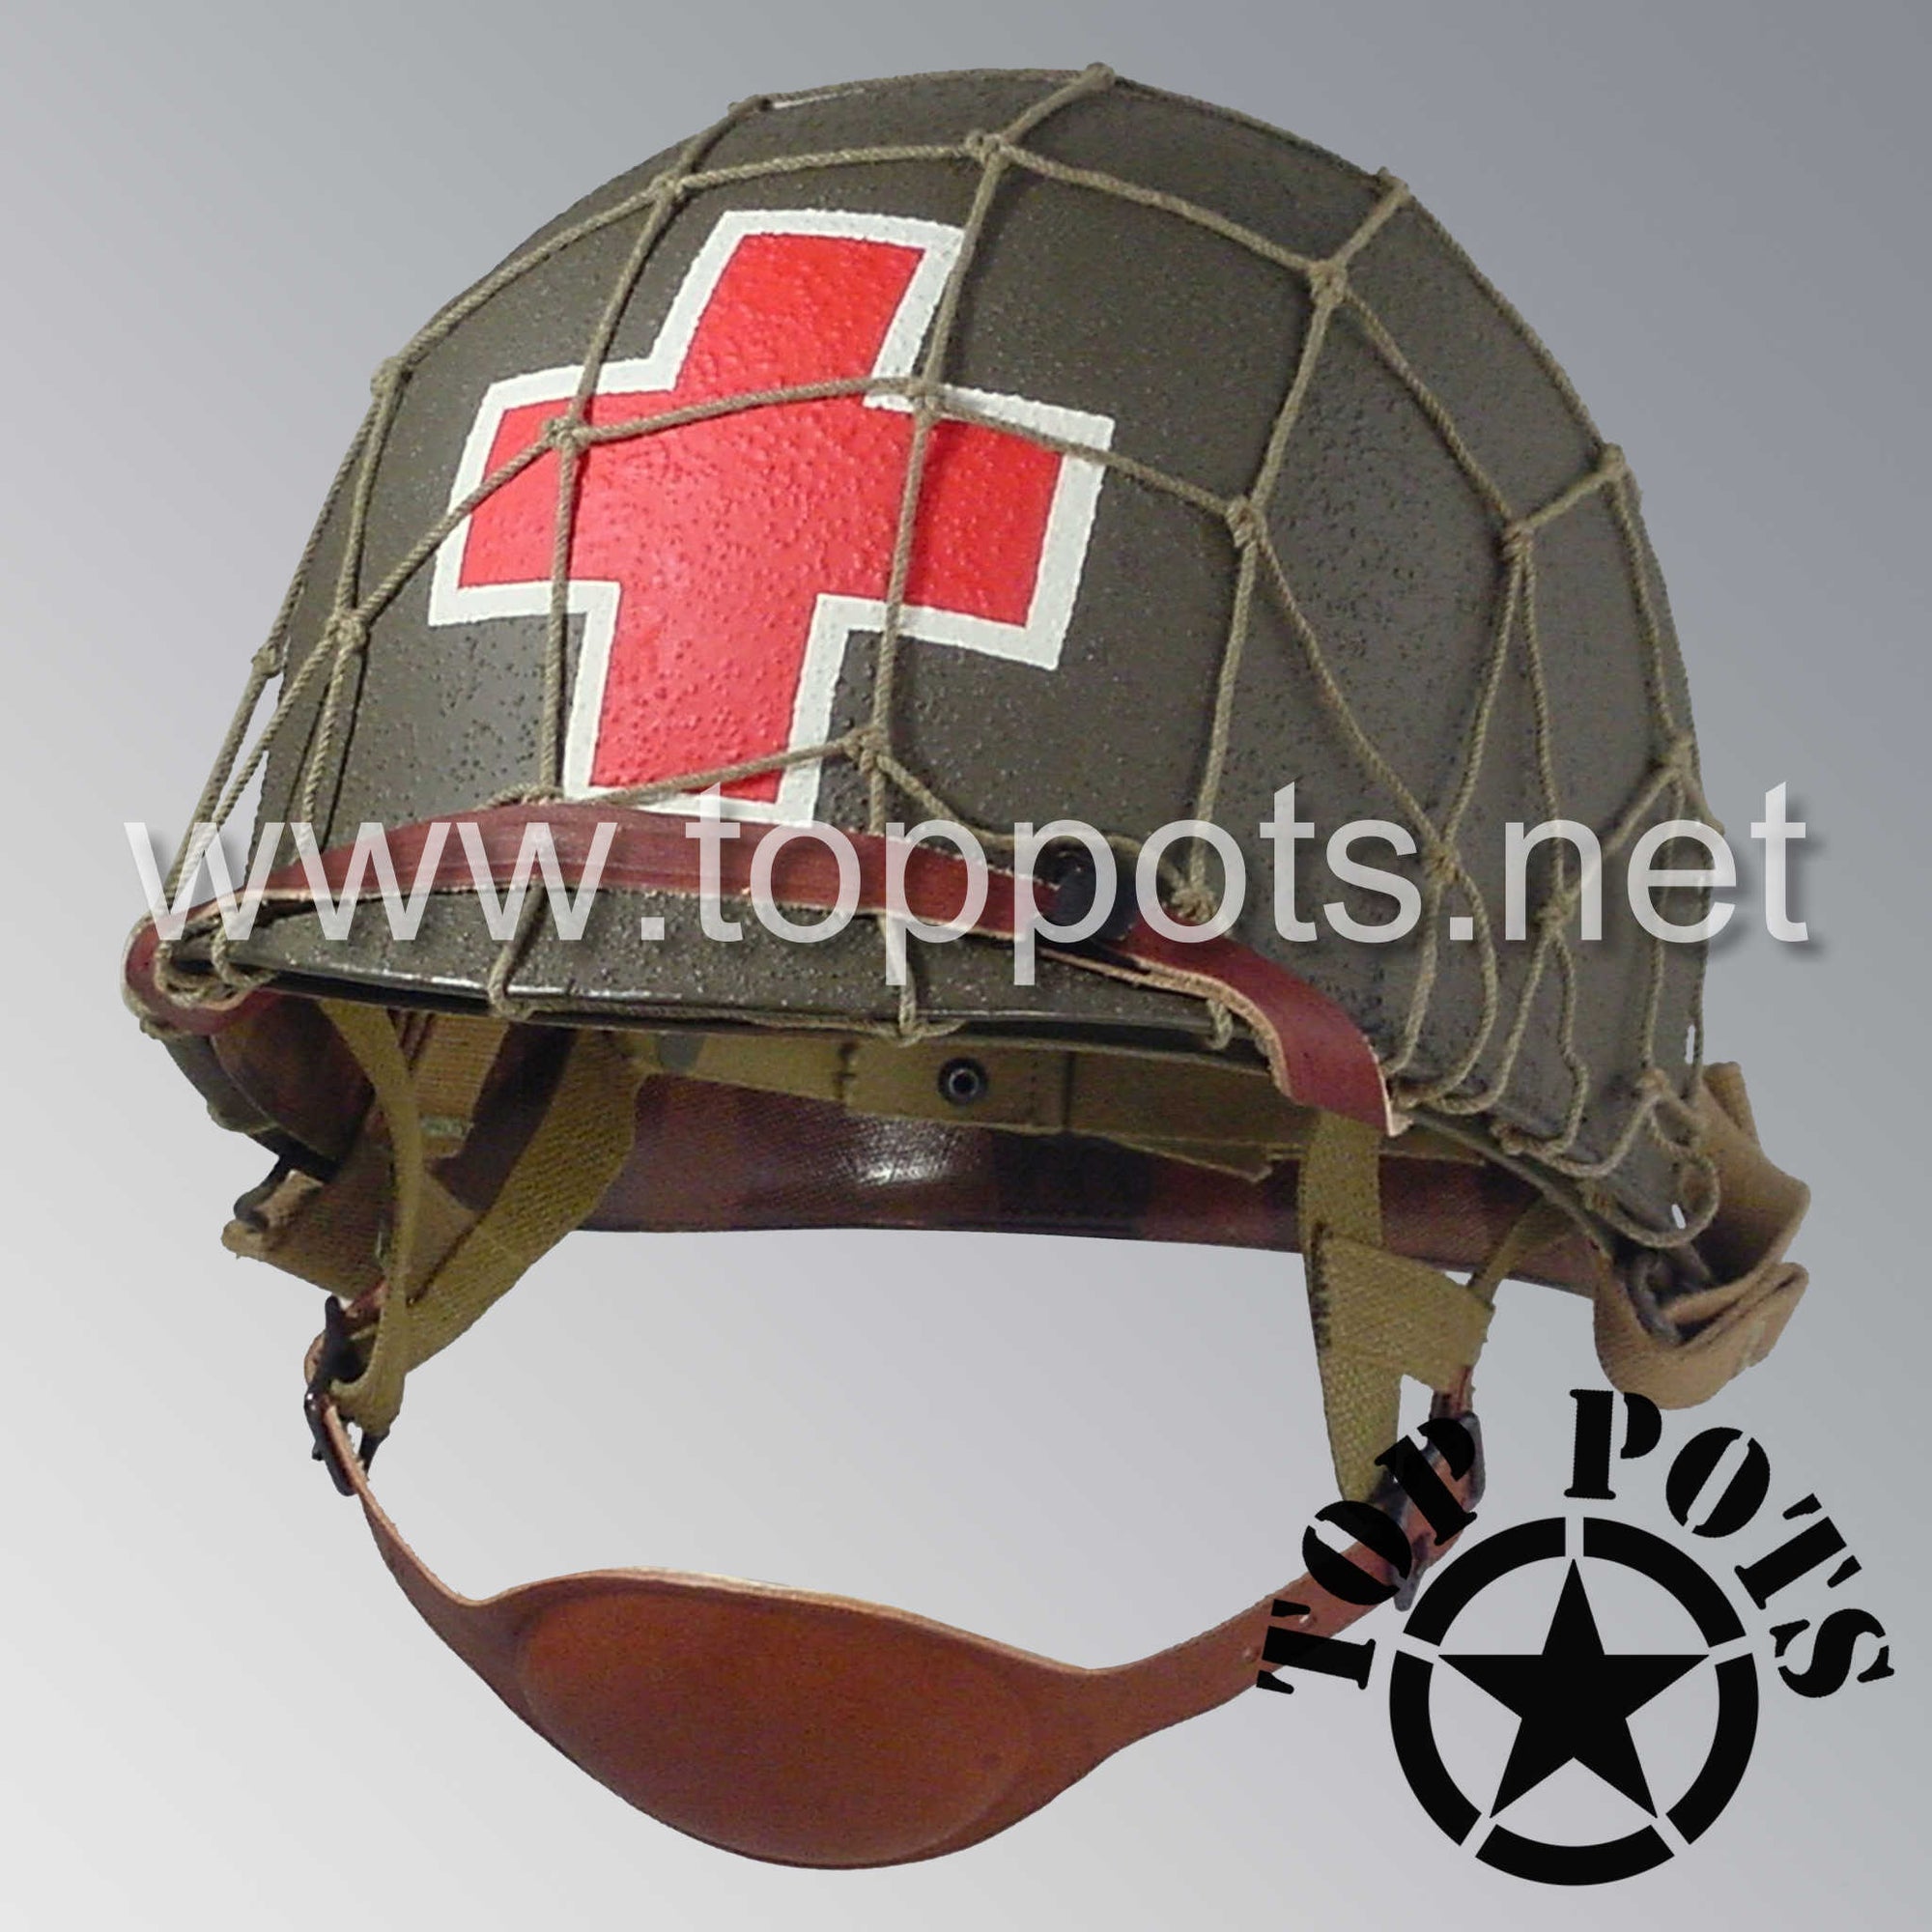 WWII US Army Restored Original M1C Paratrooper Airborne Helmet Swivel Bale Shell and Liner with Two Panel Medic Emblem with Large Cargo Net